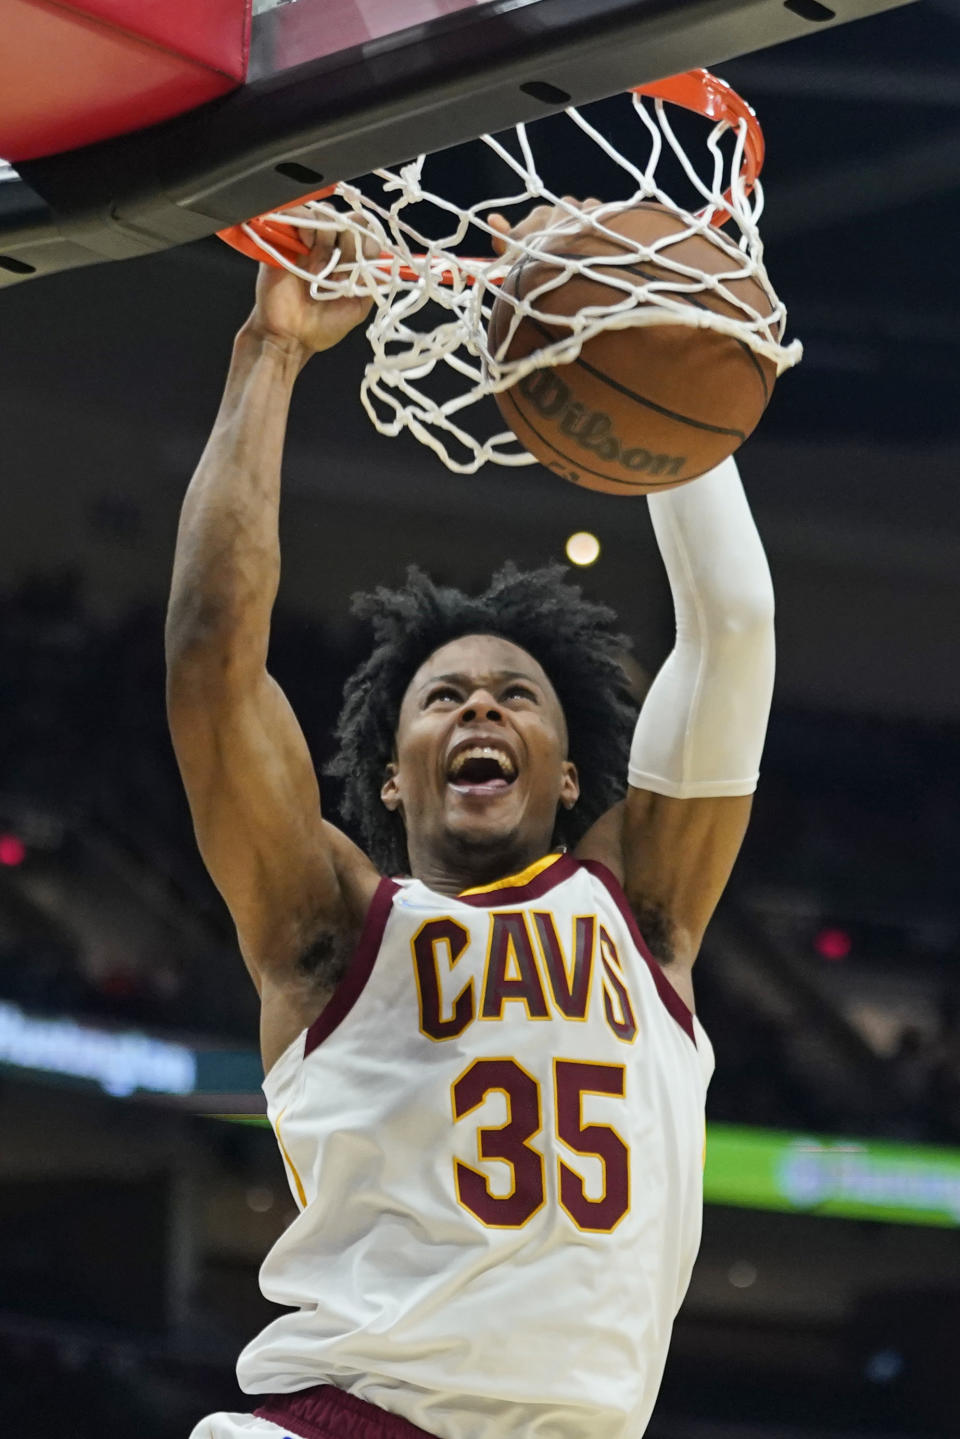 Cleveland Cavaliers' Isaac Okoro dunks the ball against the Orlando Magic in the second half of an NBA basketball game, Saturday, Nov. 27, 2021, in Cleveland. The Cavaliers won 105-92. (AP Photo/Tony Dejak)